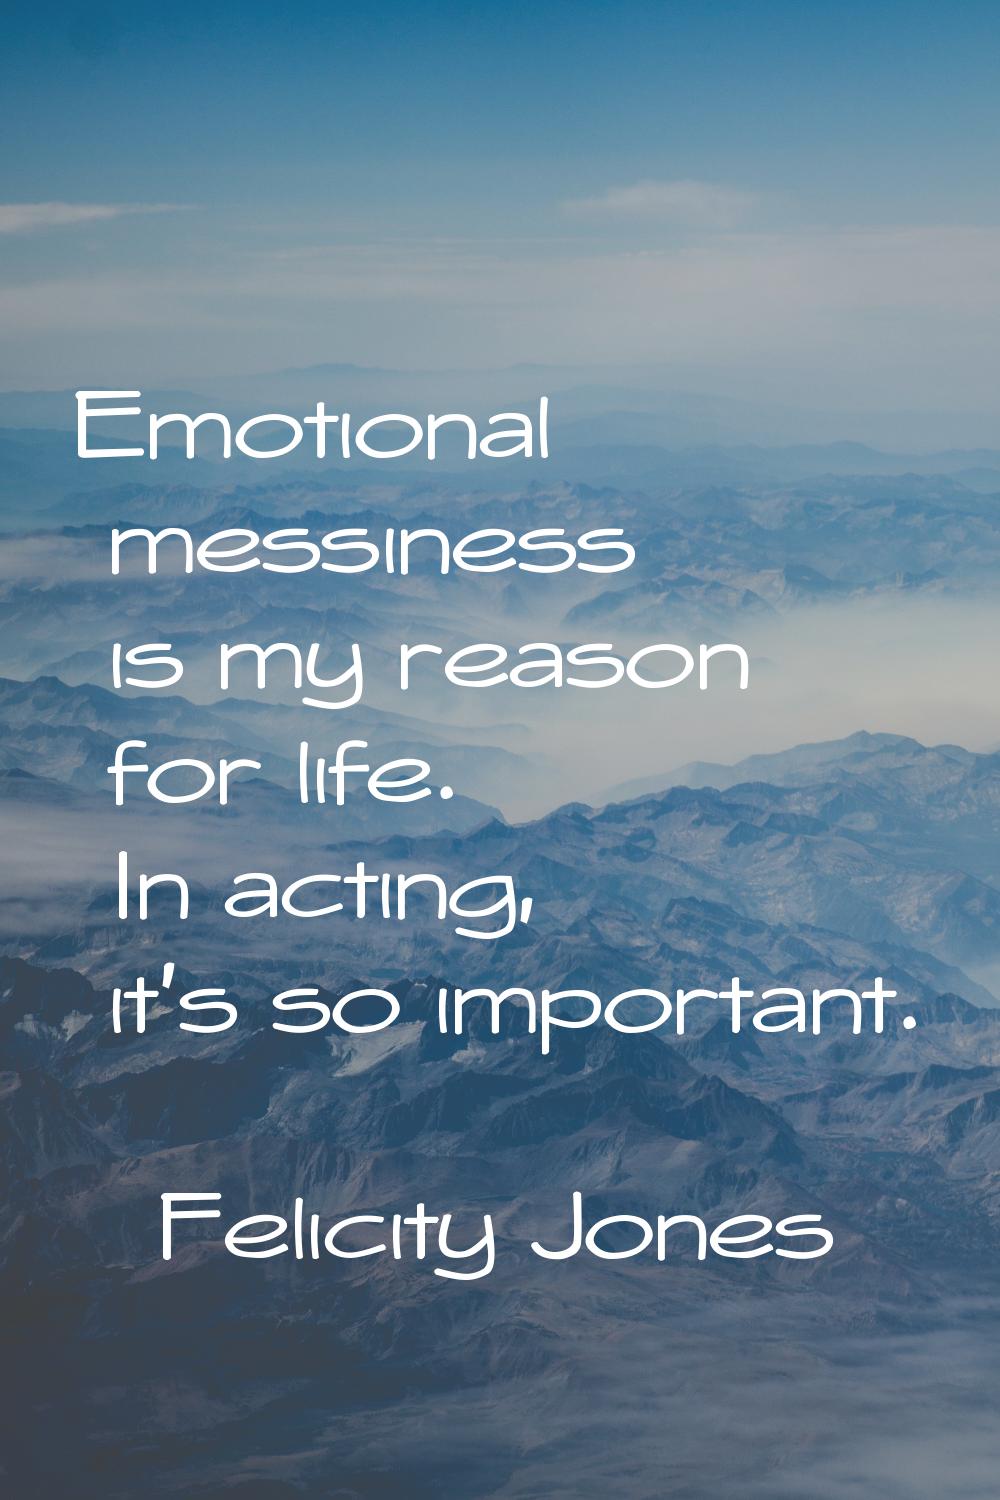 Emotional messiness is my reason for life. In acting, it's so important.